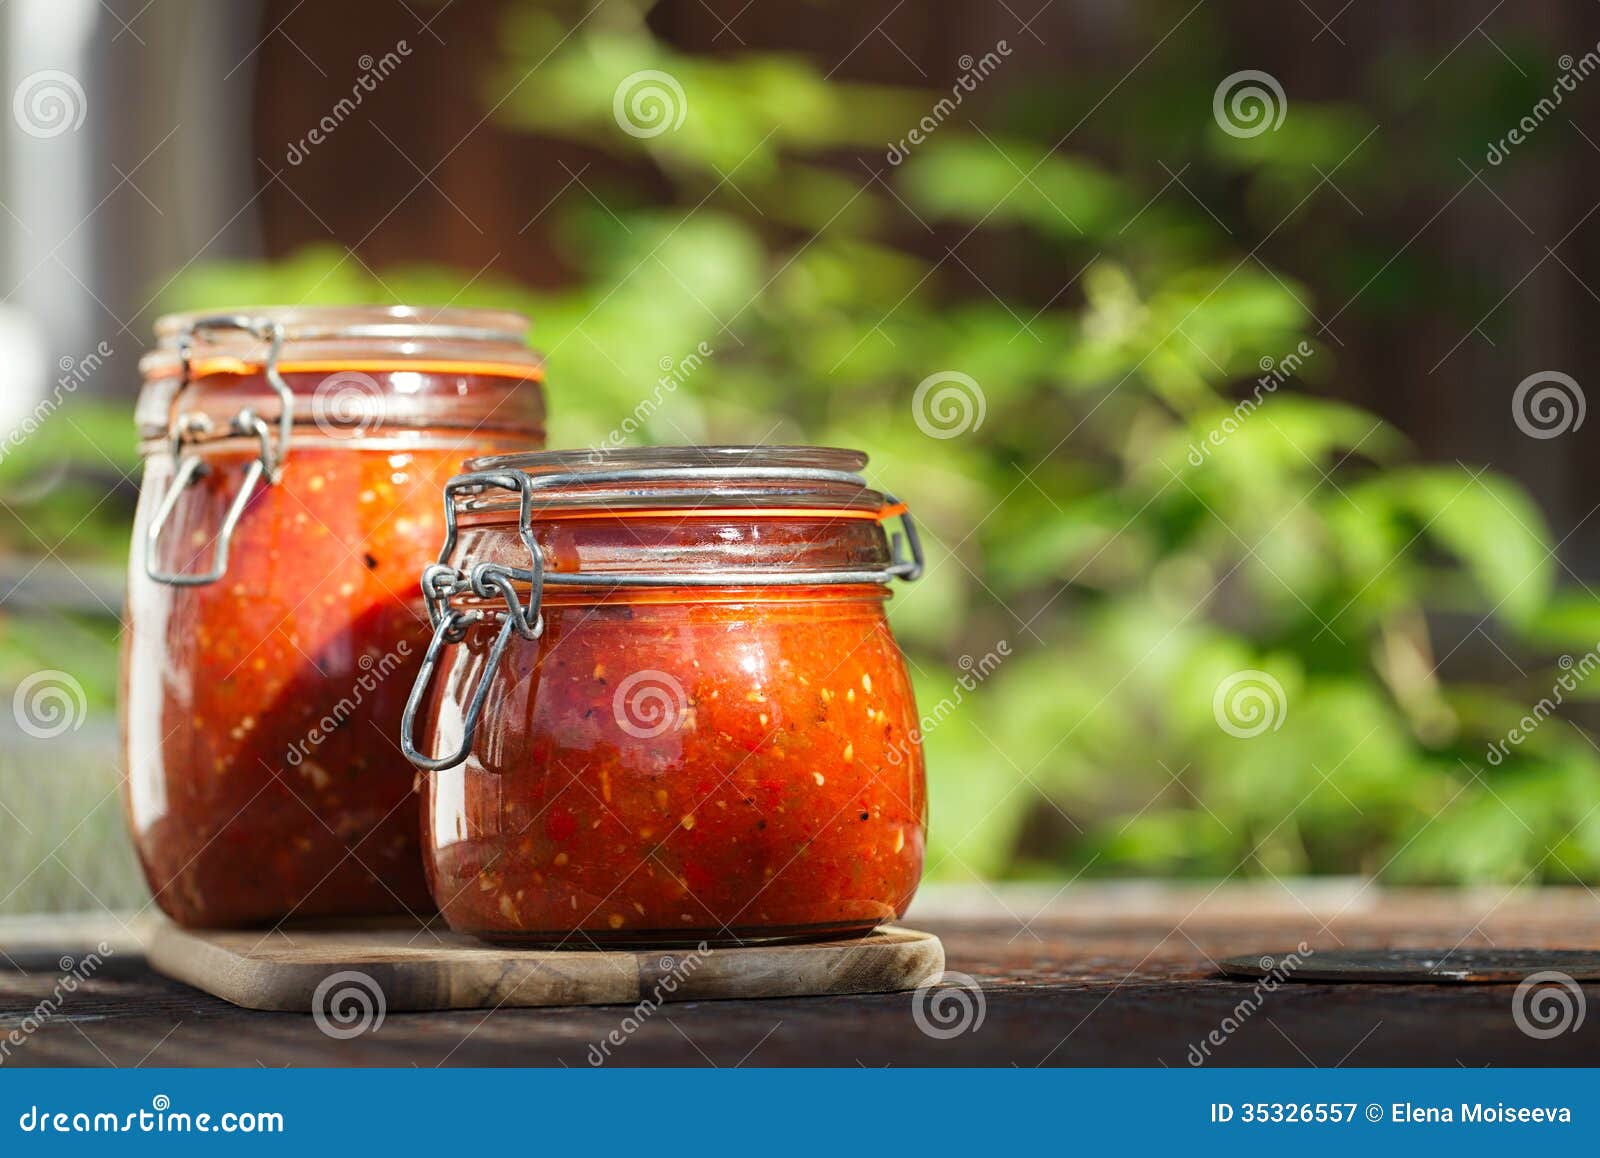 jar of home made classic spicy tomato salsa